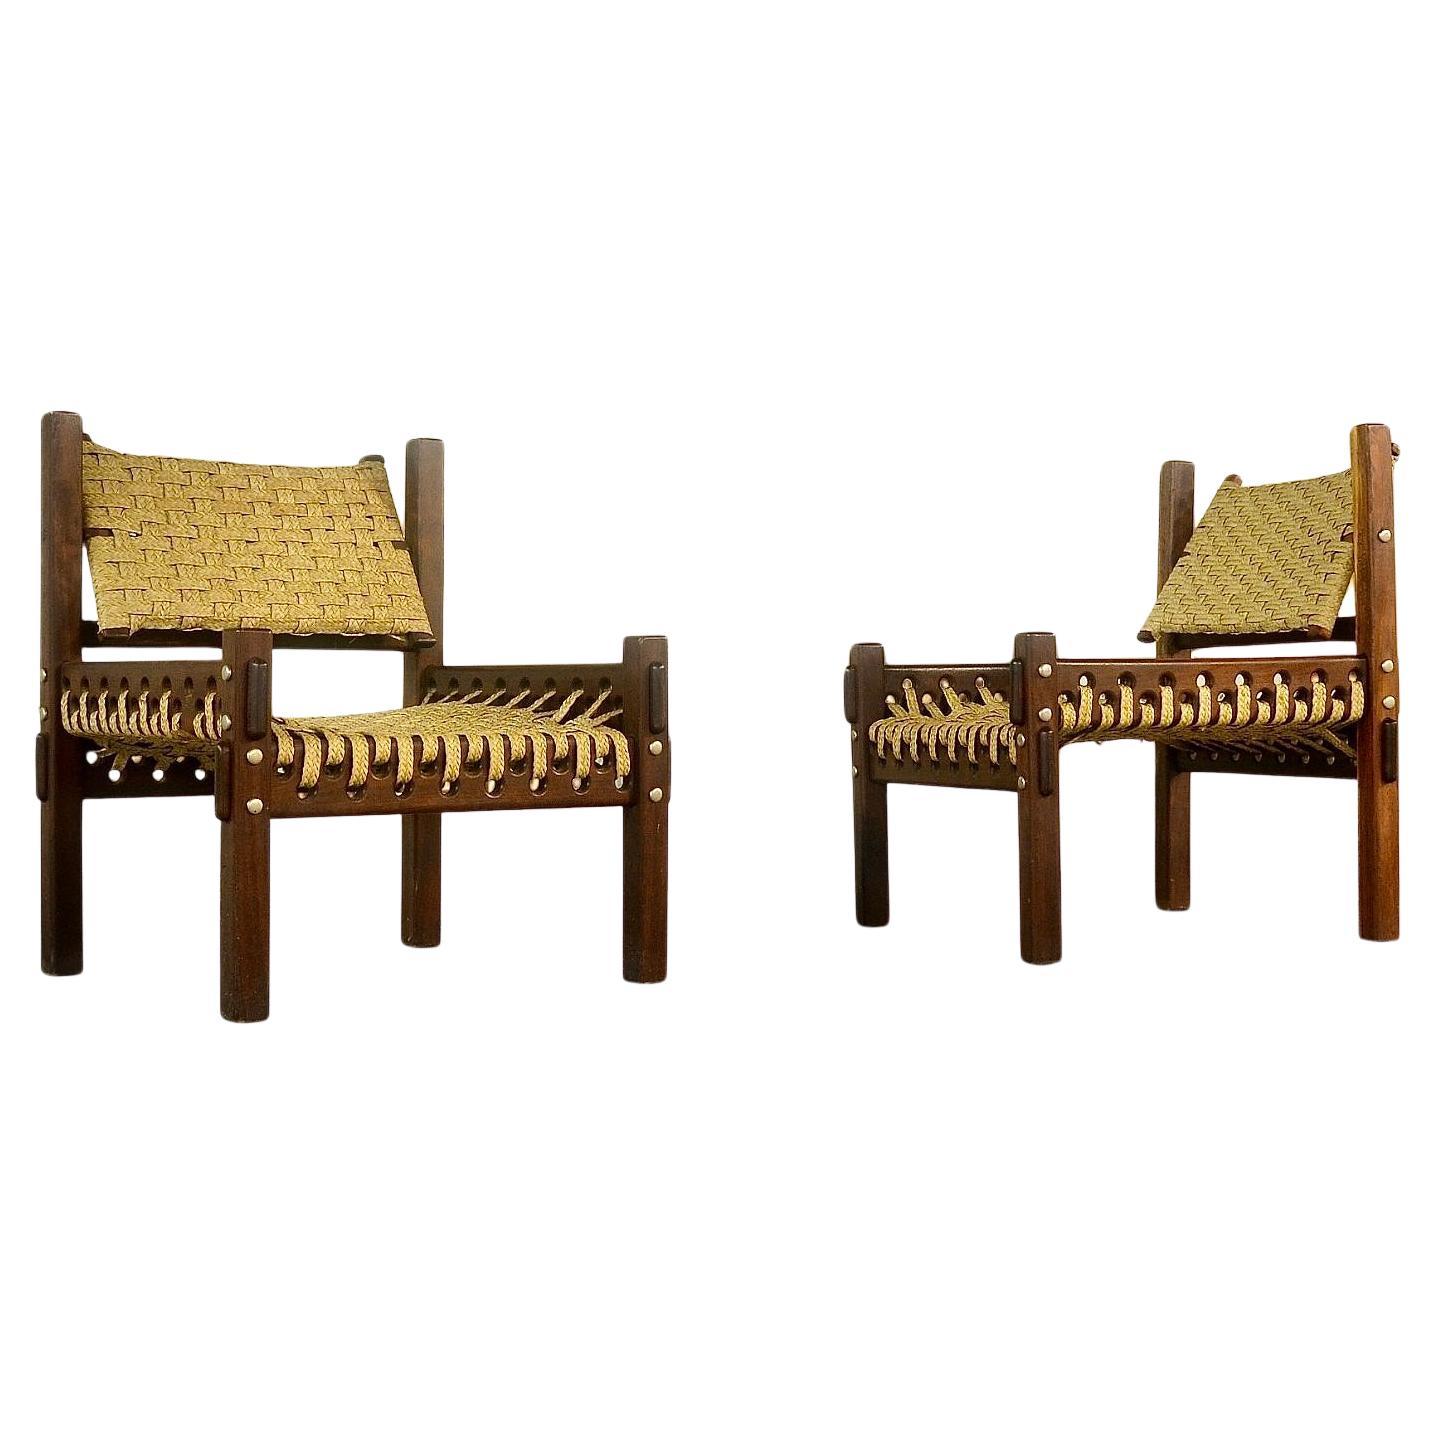 Mahogany and woven palm fiber armchairs, 1960s For Sale